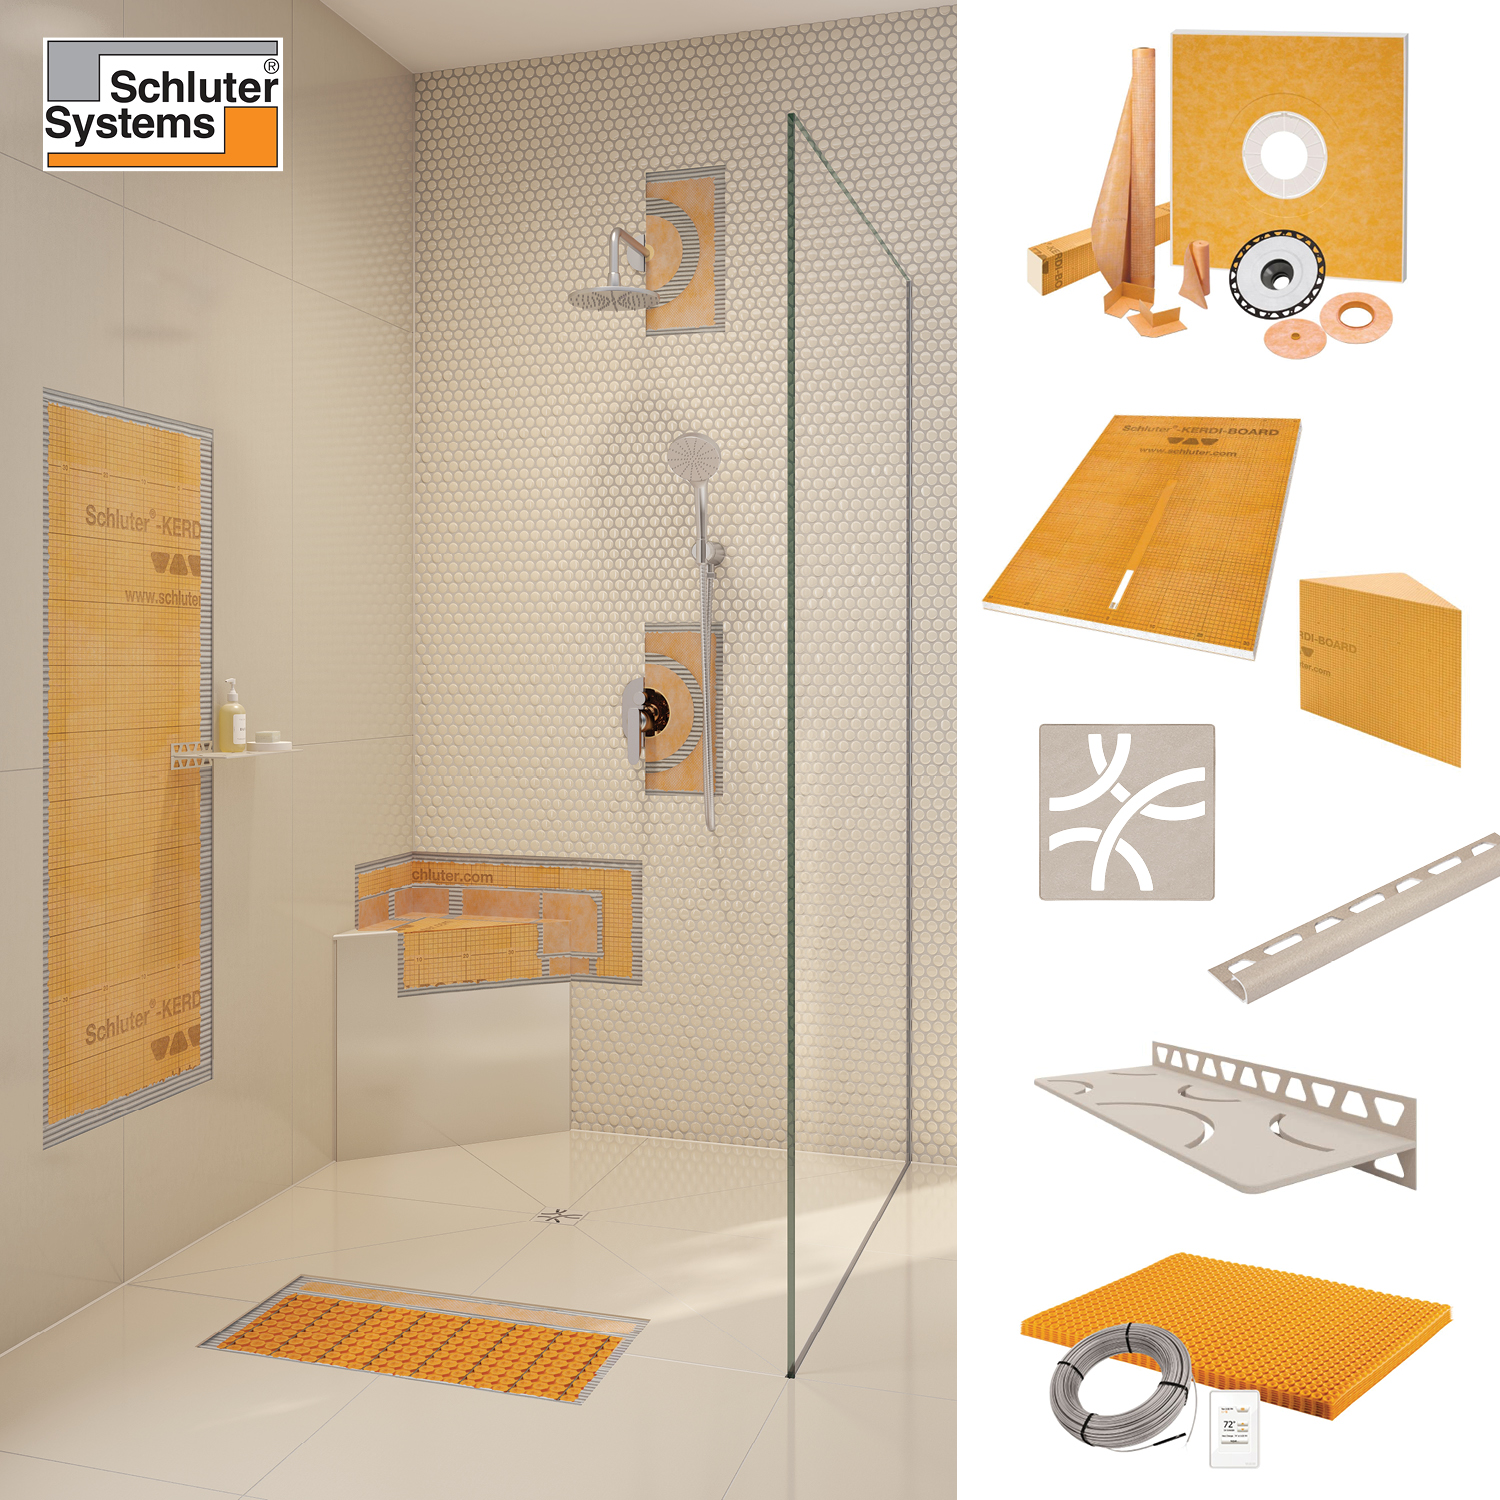 Purchasing shower-systems